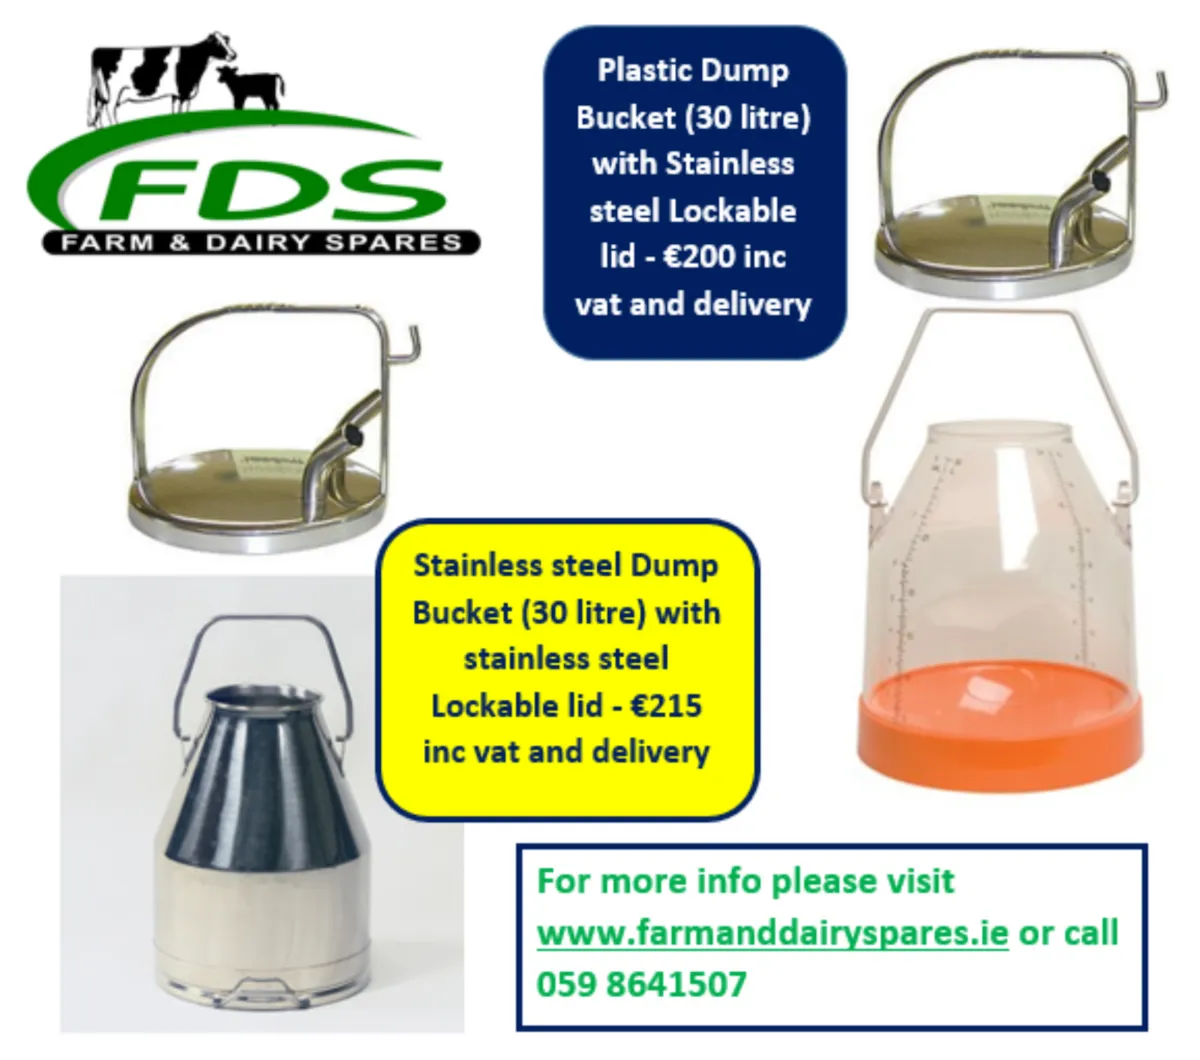 Dump buckets for sale at FDS - Image 1